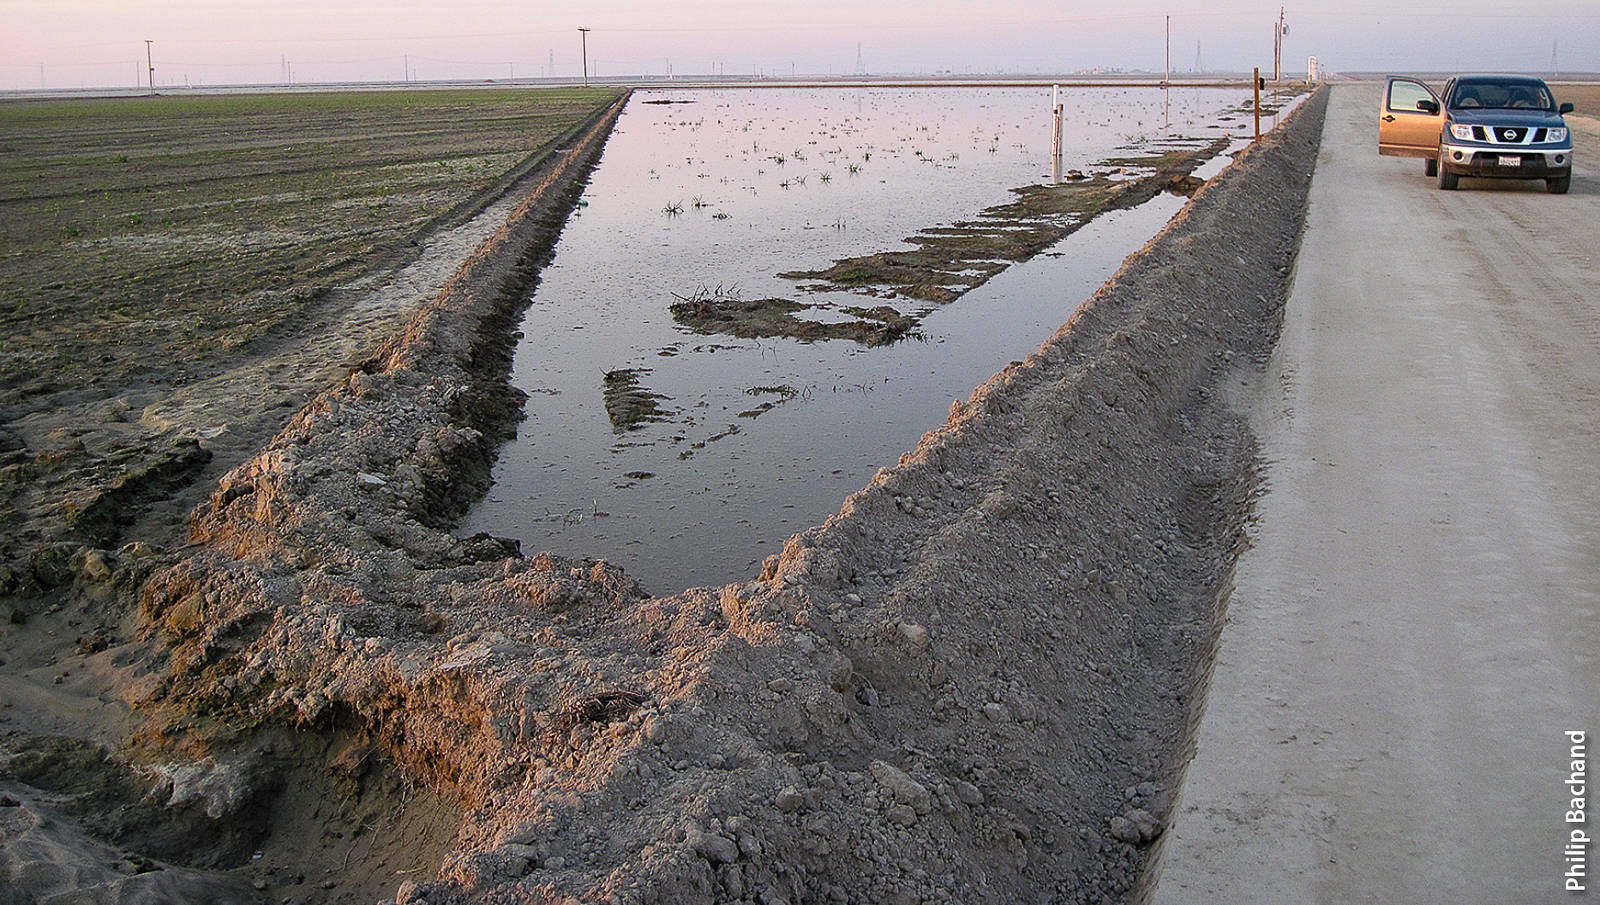 Wintertime modifications to tomato field to manage water were similar to rice checks to enable capture and infiltration of flood flows. Modifications included cutting small check berms to accommodate field gradients and installing low cost flashboard risers to manage water flow and elevations.